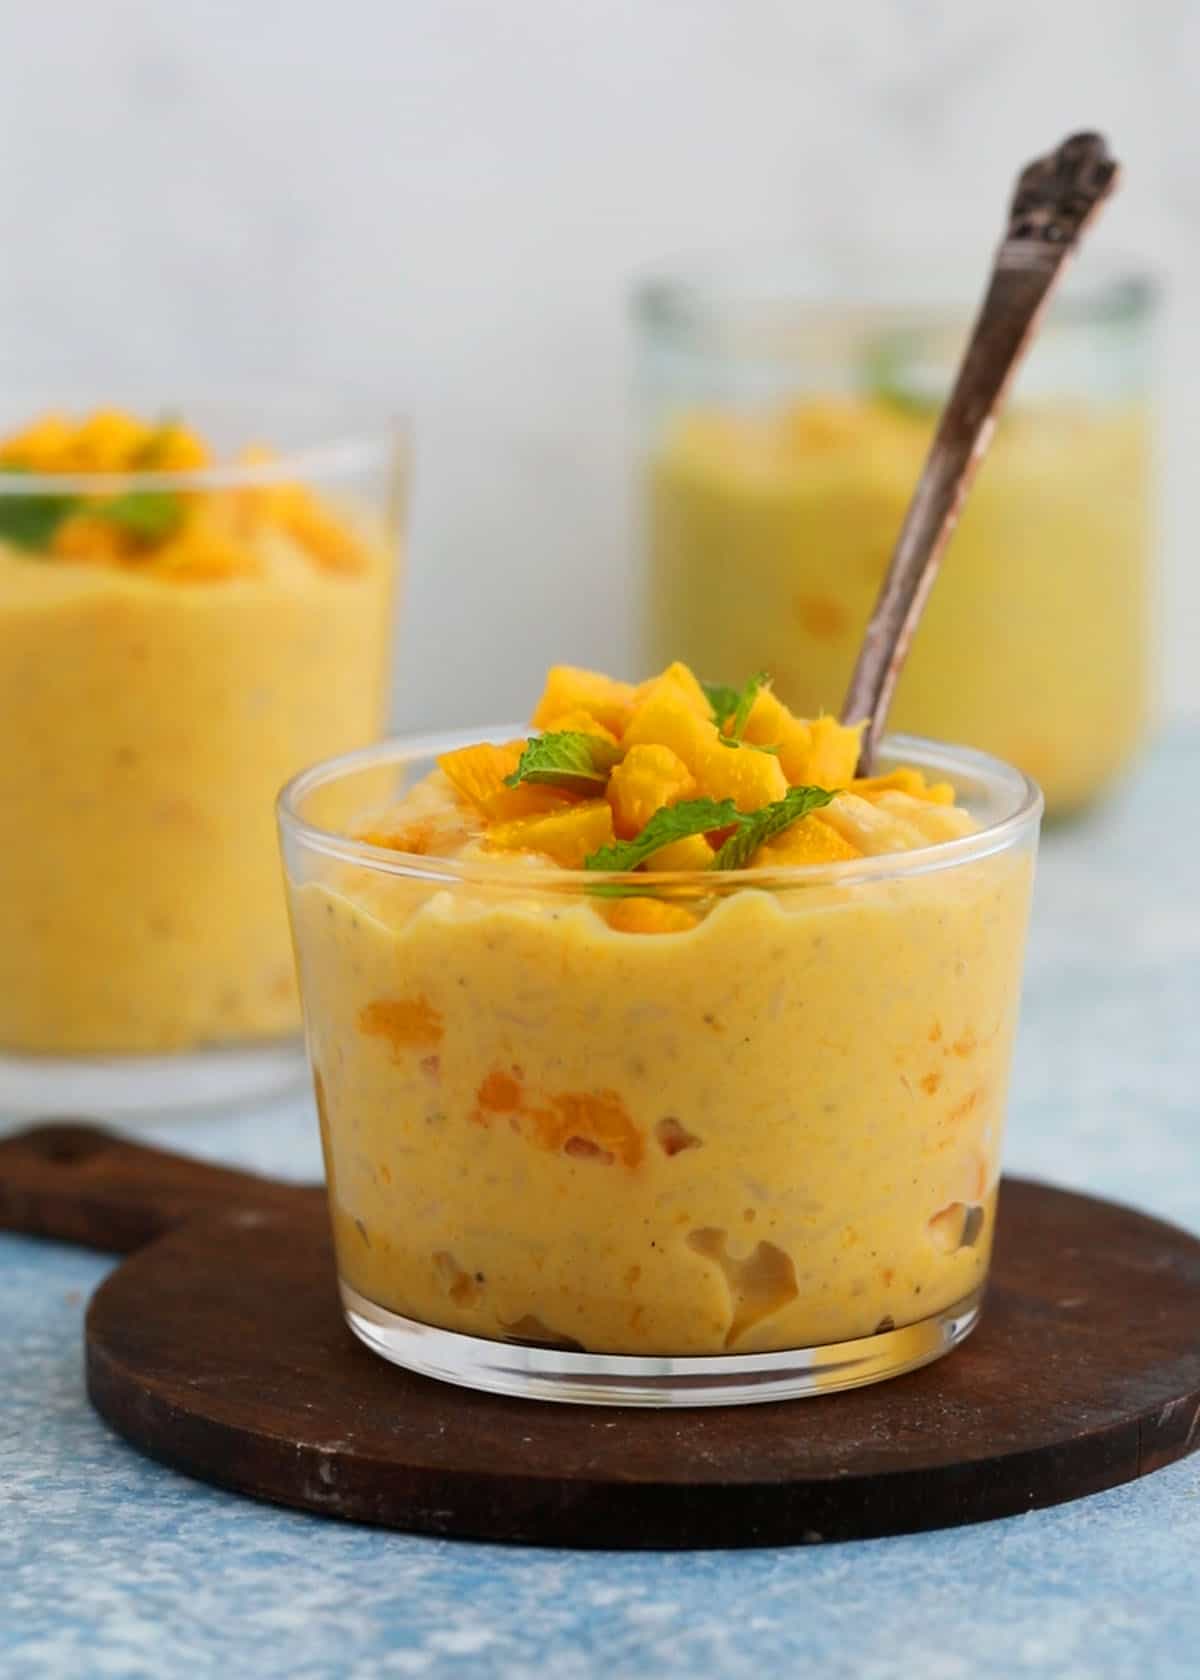 three glass jars filled with yellow colored mango rice pudding.